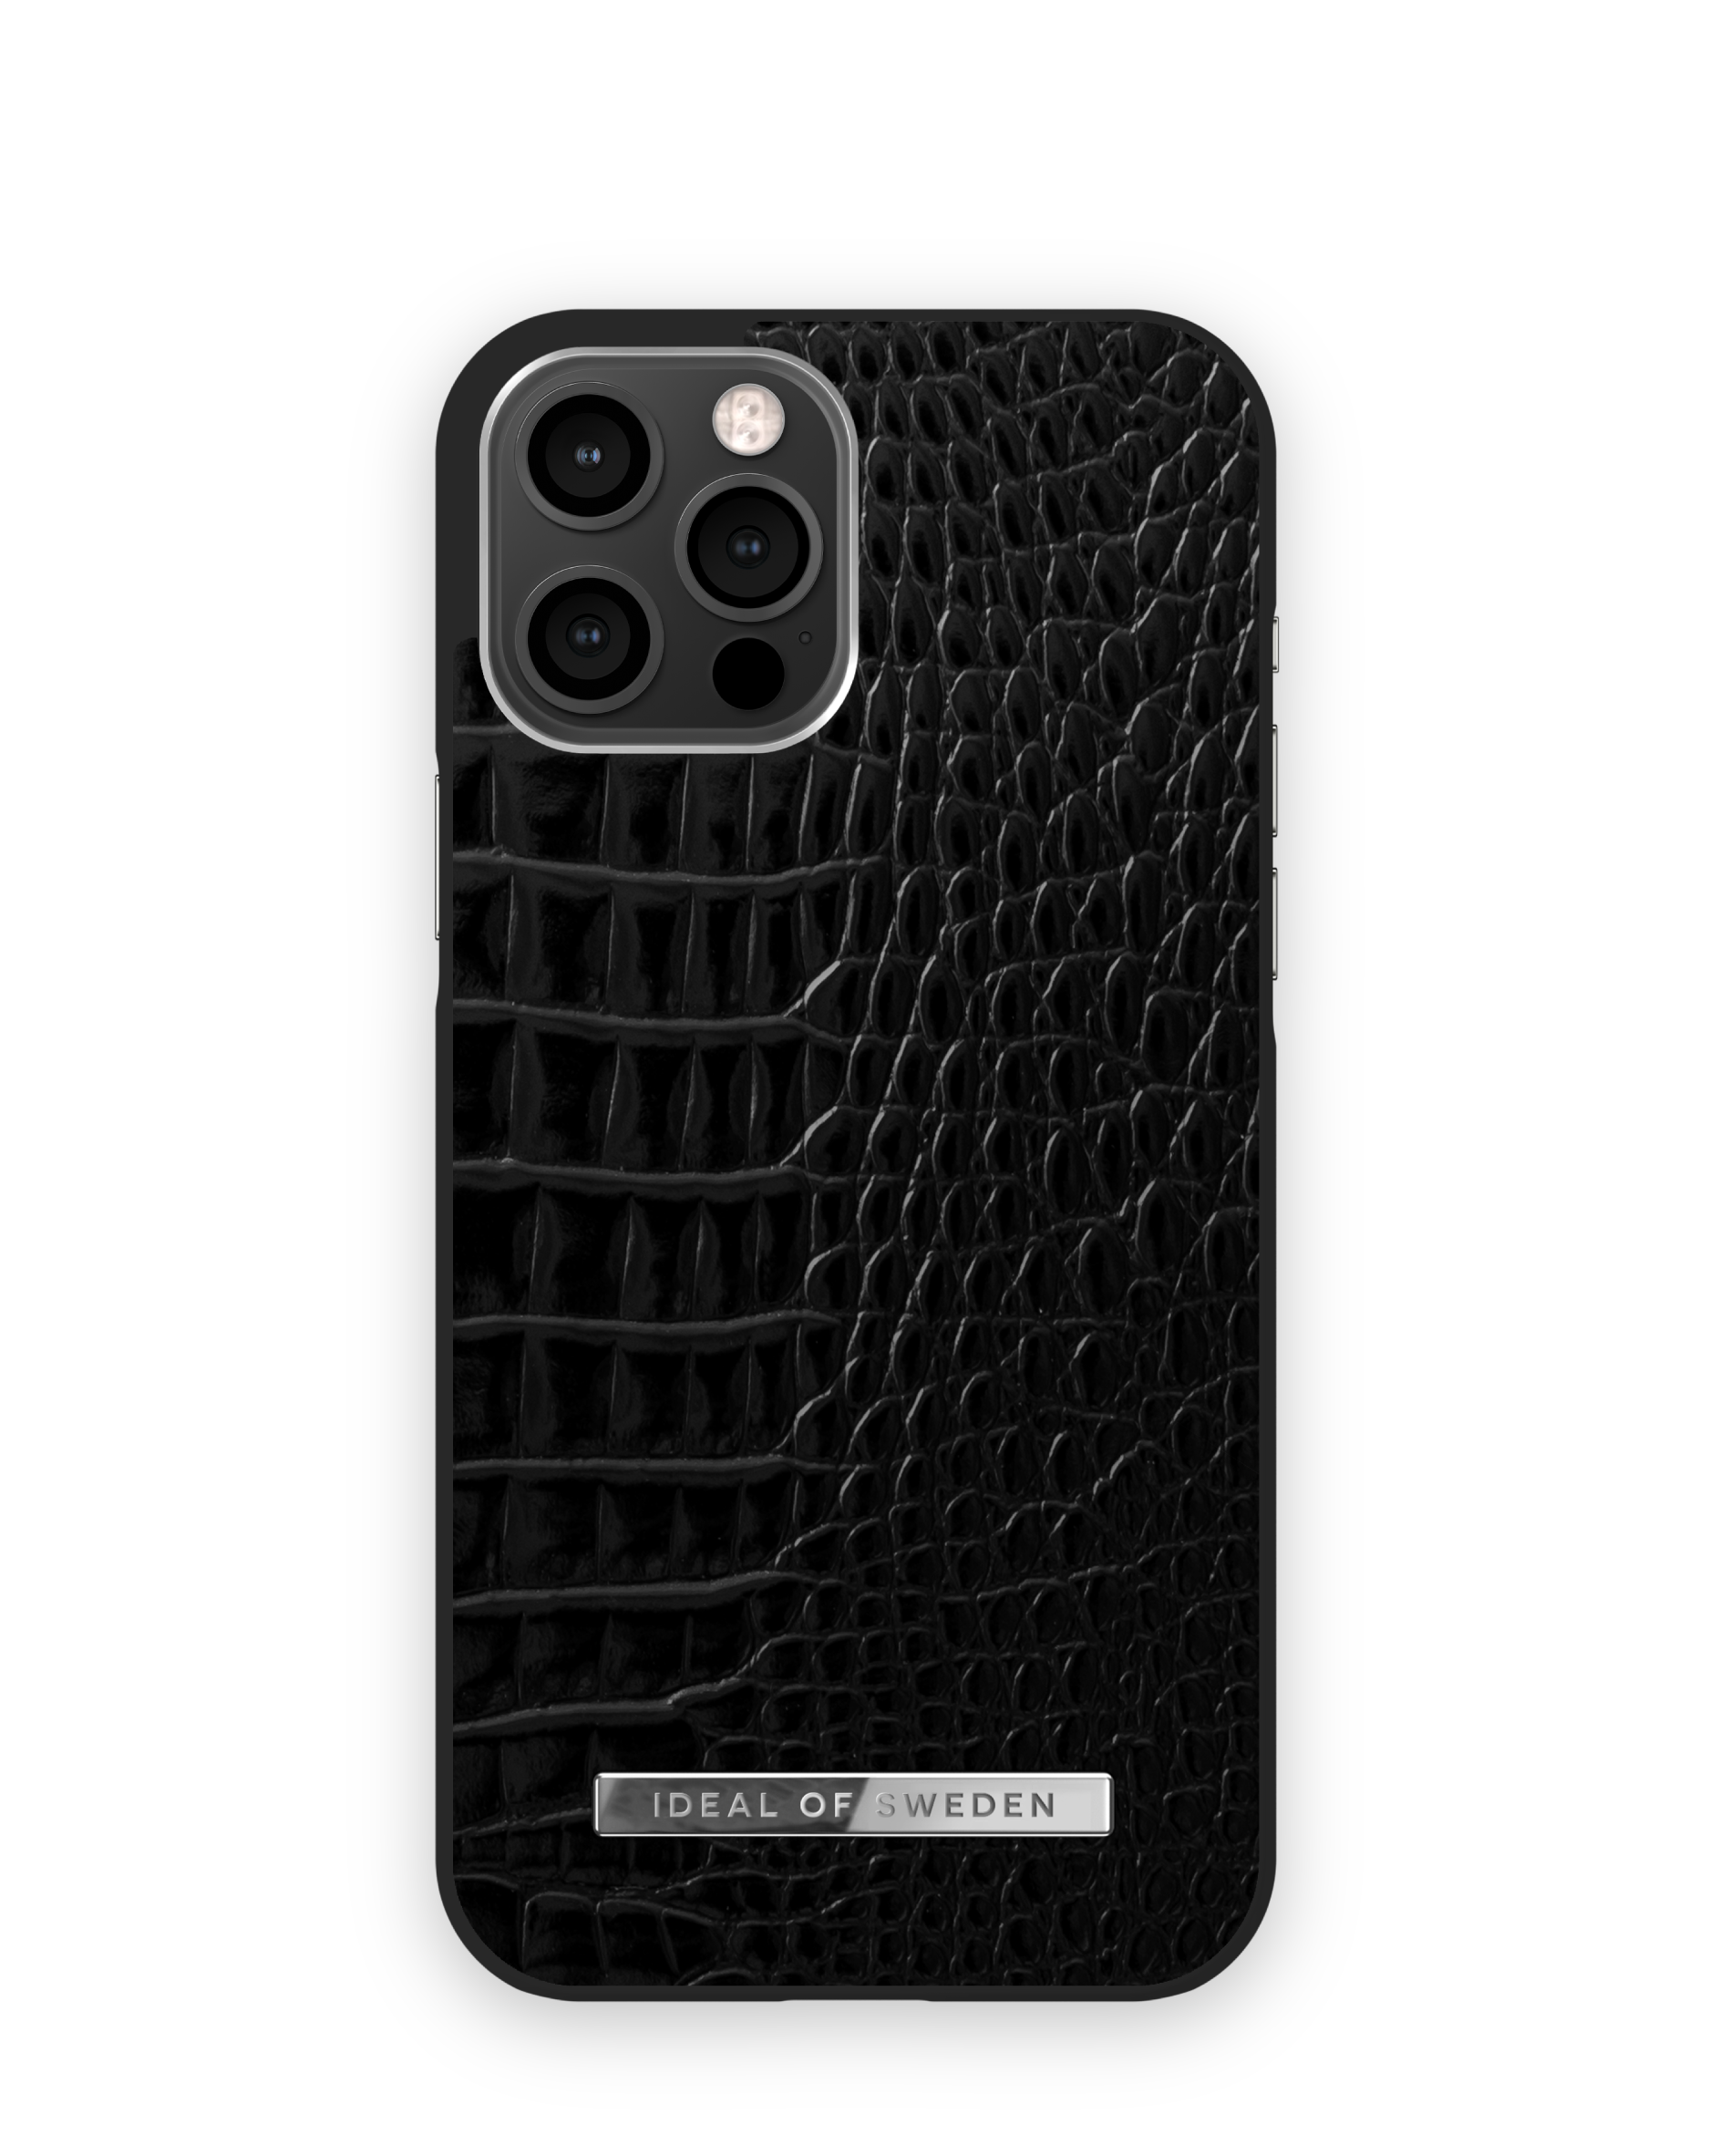 IDEAL OF SWEDEN IDACSS21-I2067, Backcover, Silver Croco Pro Max, Noir Neo 12 IPhone Apple